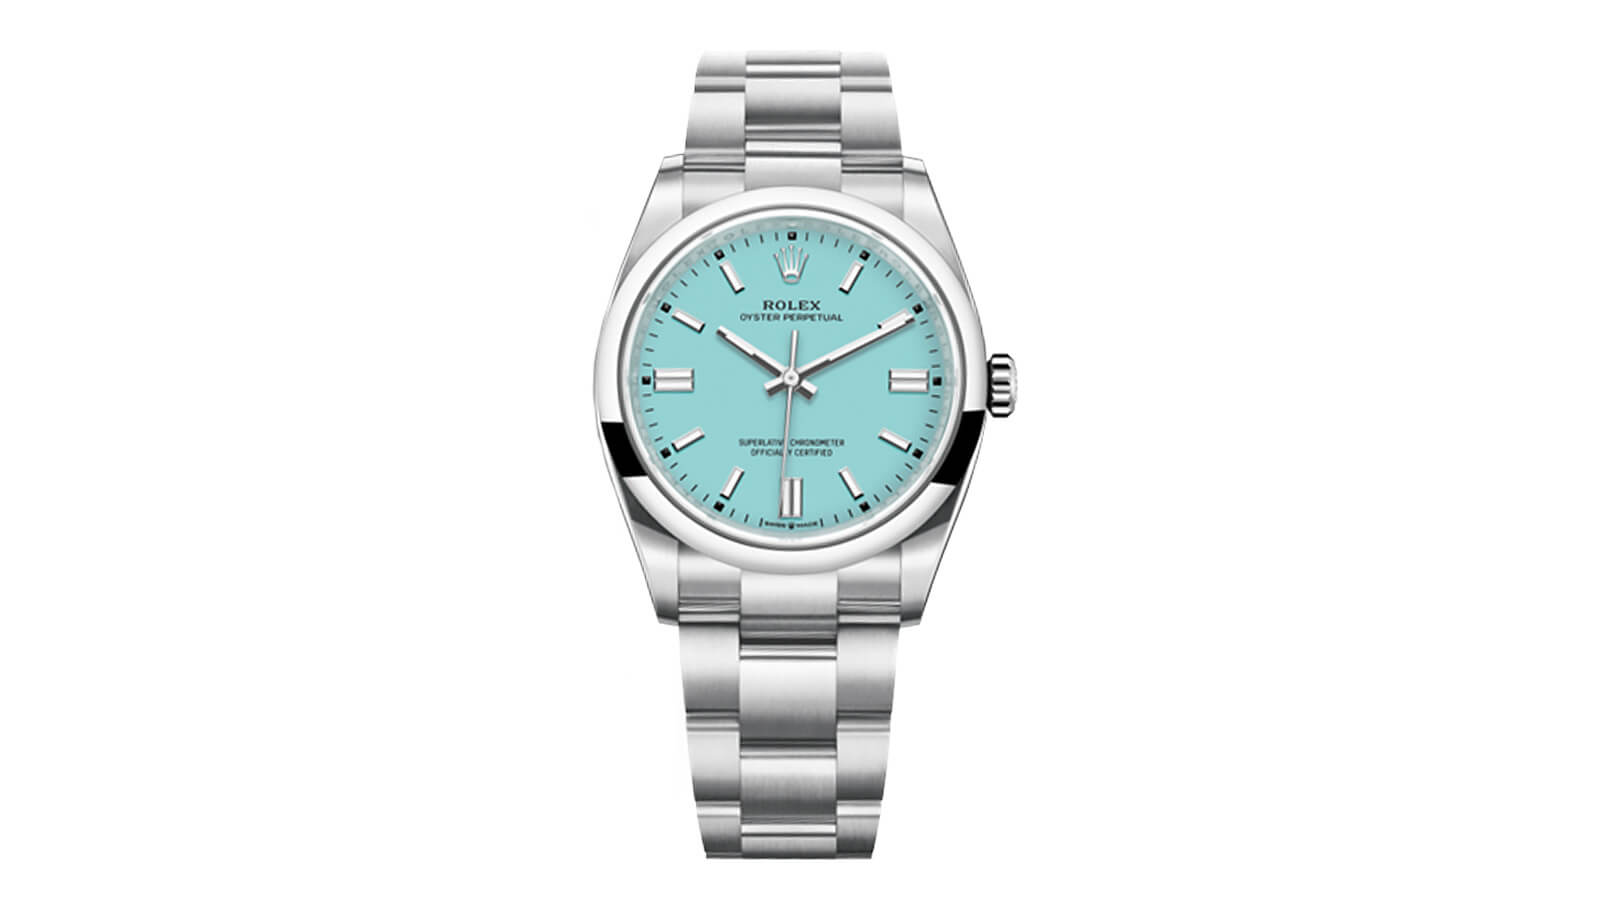  Rolex Oyster Perpetual 36